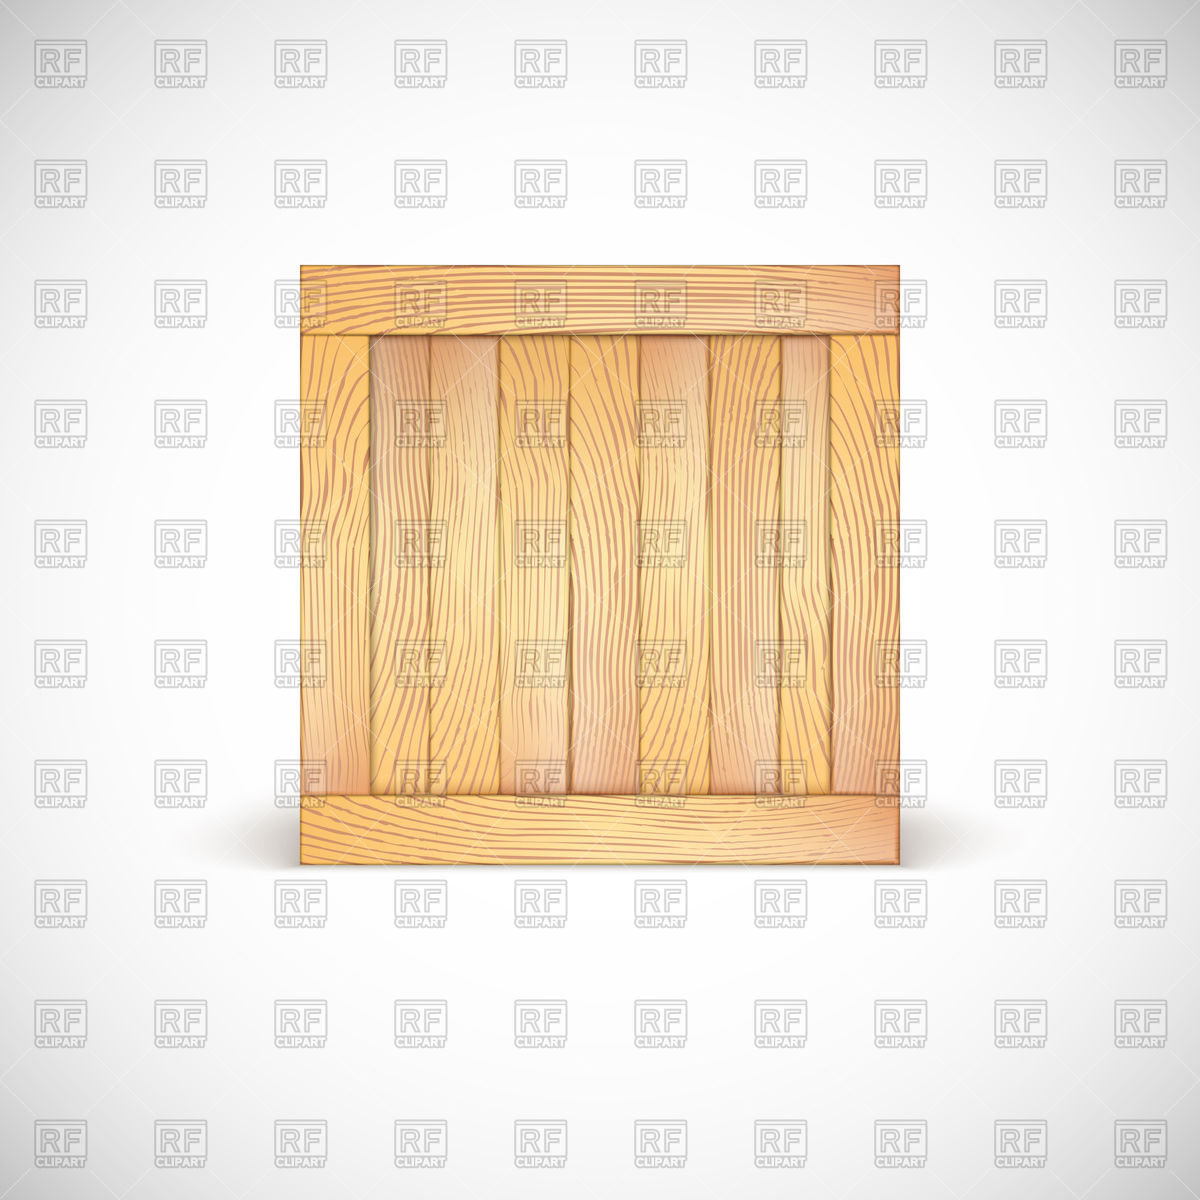 Wooden Box 95658 Objects Download Royalty Free Vector Clipart  Eps